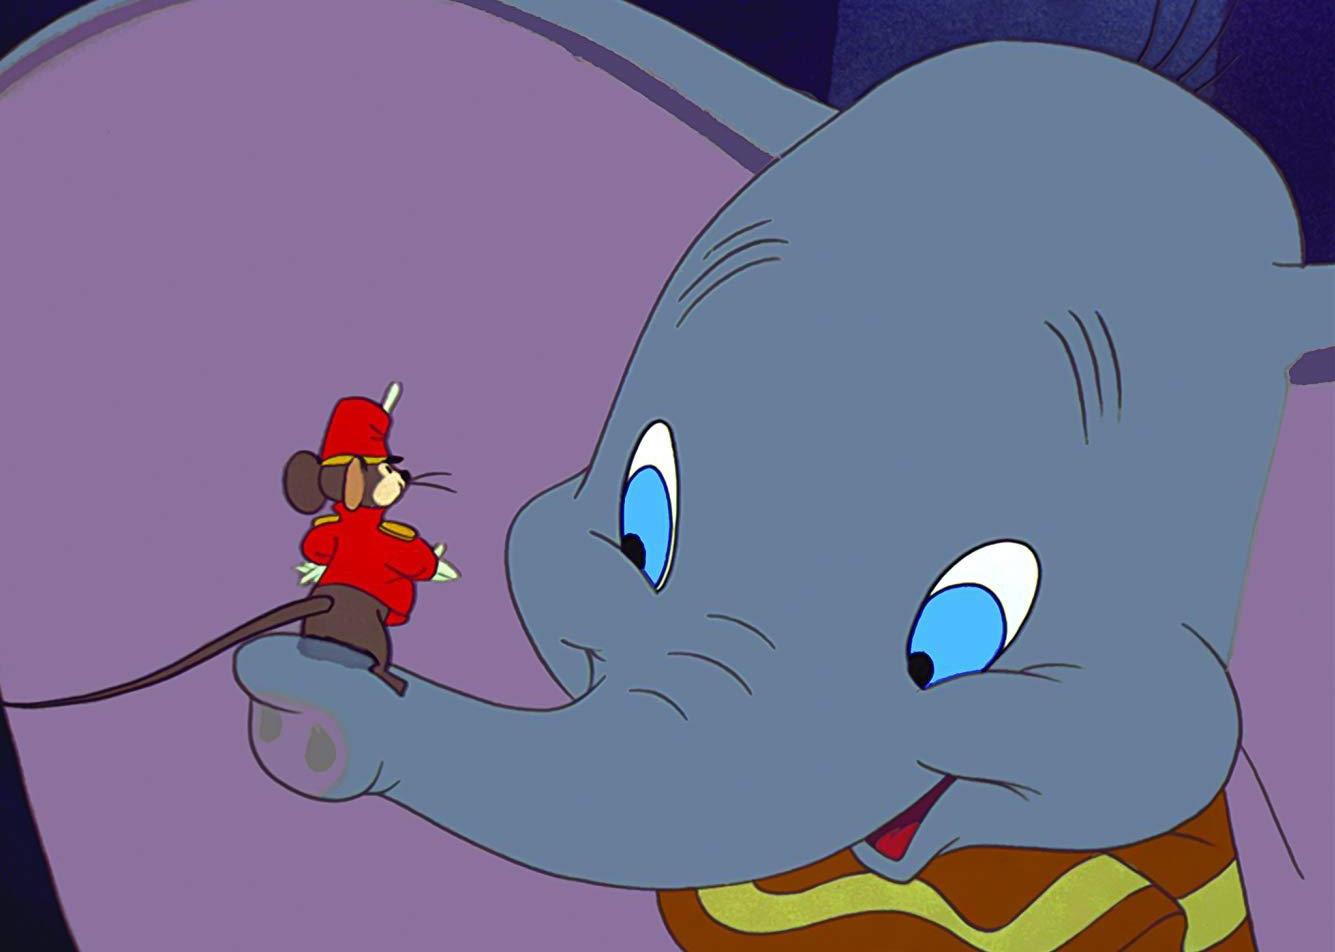 A cartoon of an elephant with a dressed up mouse on it